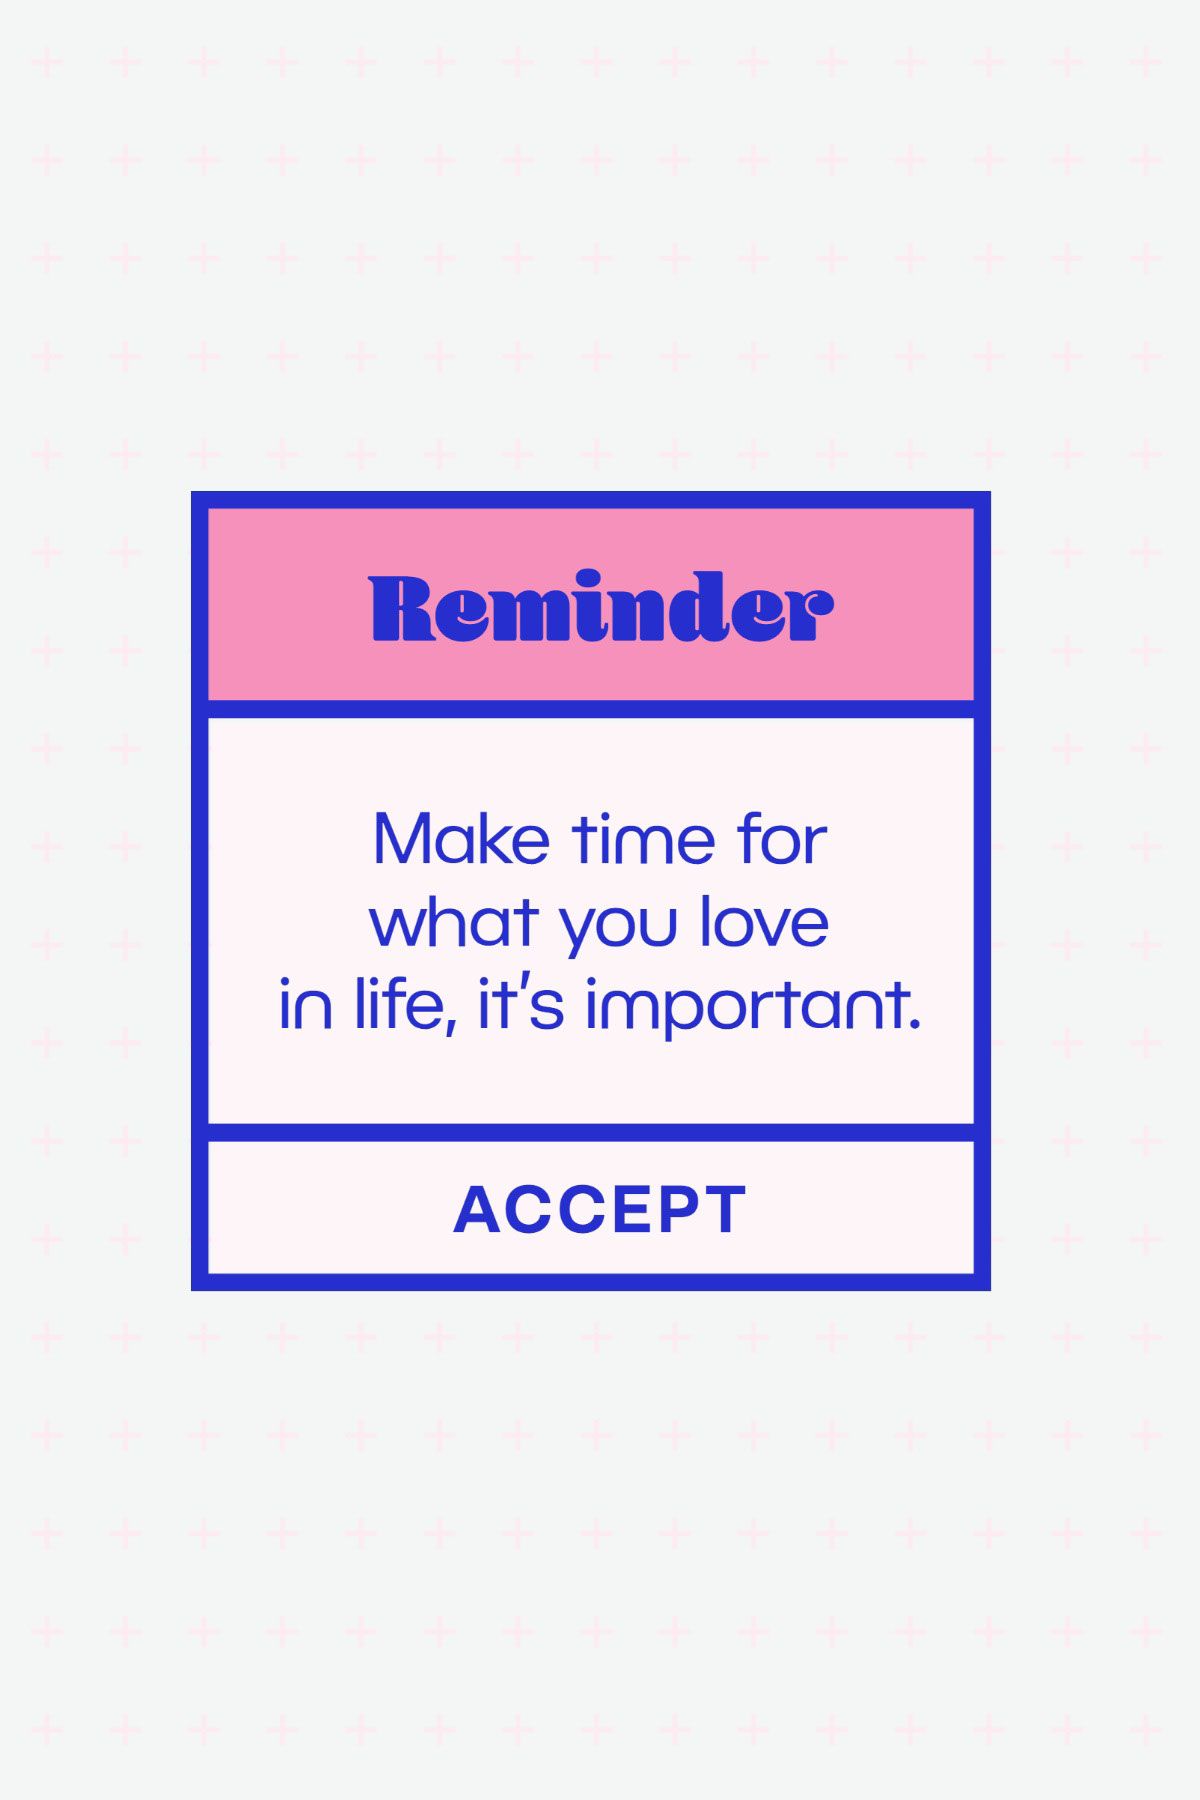 Pink & Blue Modern Bold Reminder Pinterest Post Reminder Accept Make time for what you love in life, it’s important.